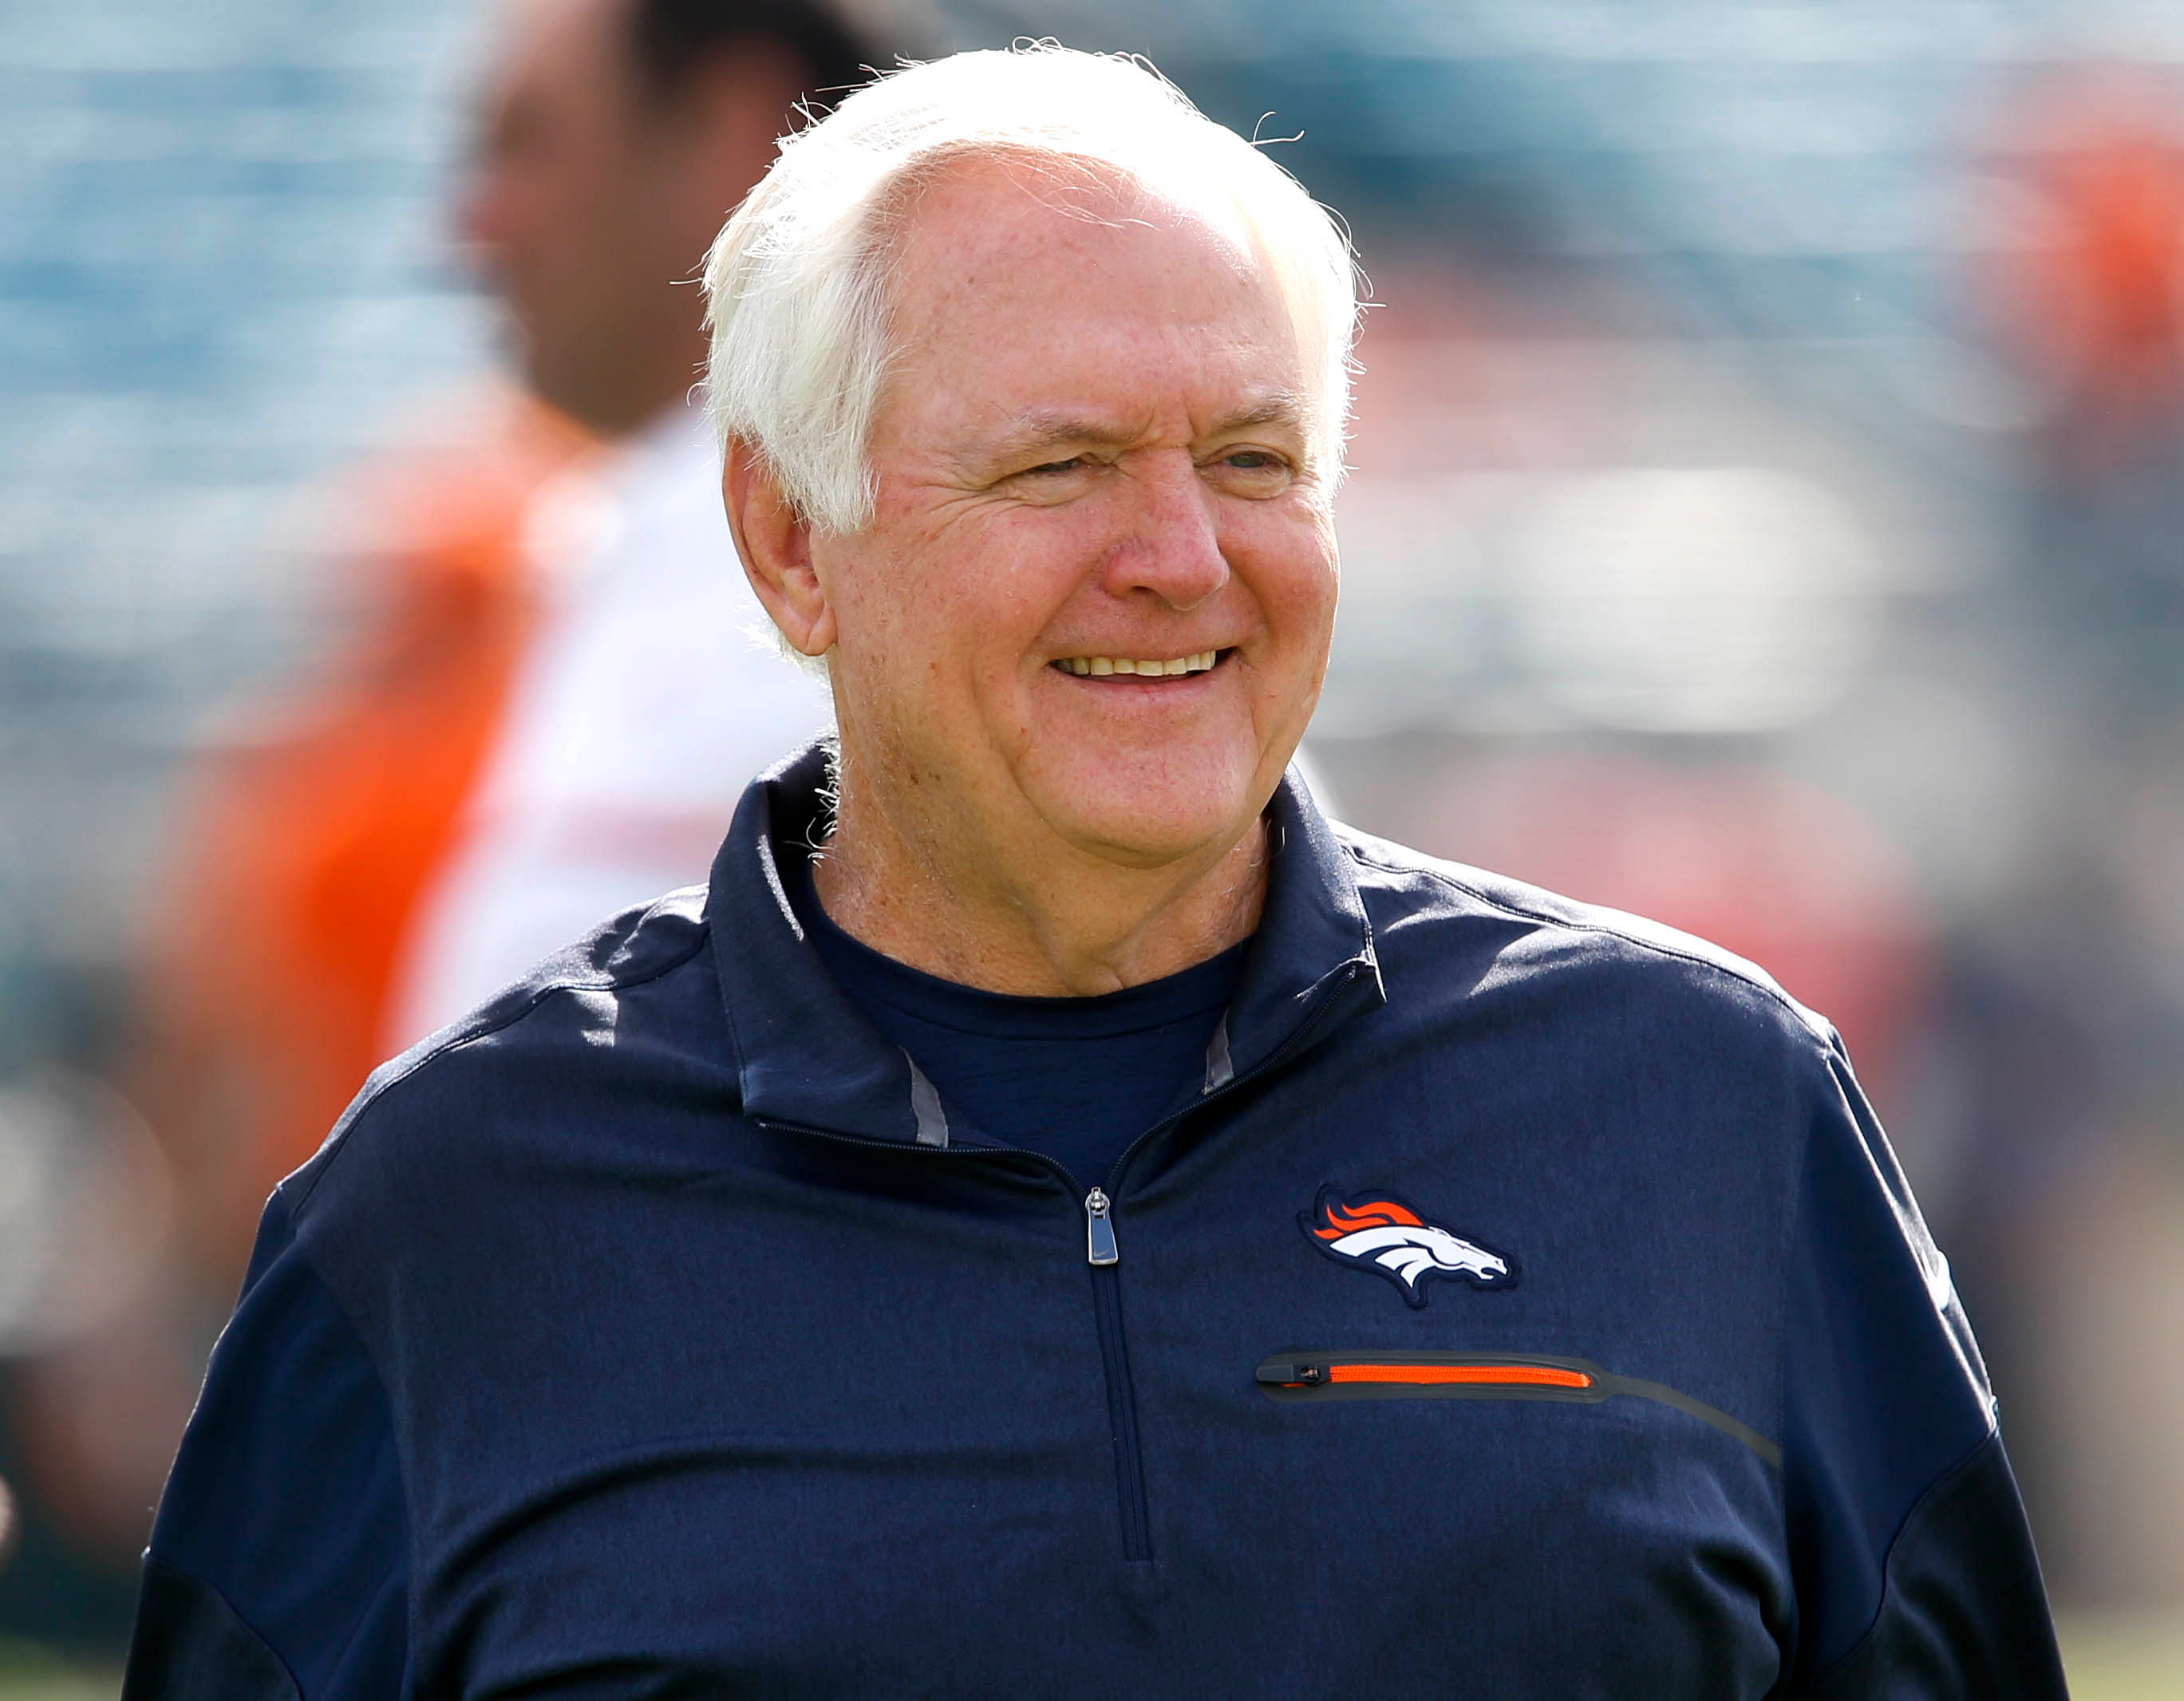 Wade Phillips was part of the Denver Broncos coaching staff when they won Super Bowl 50